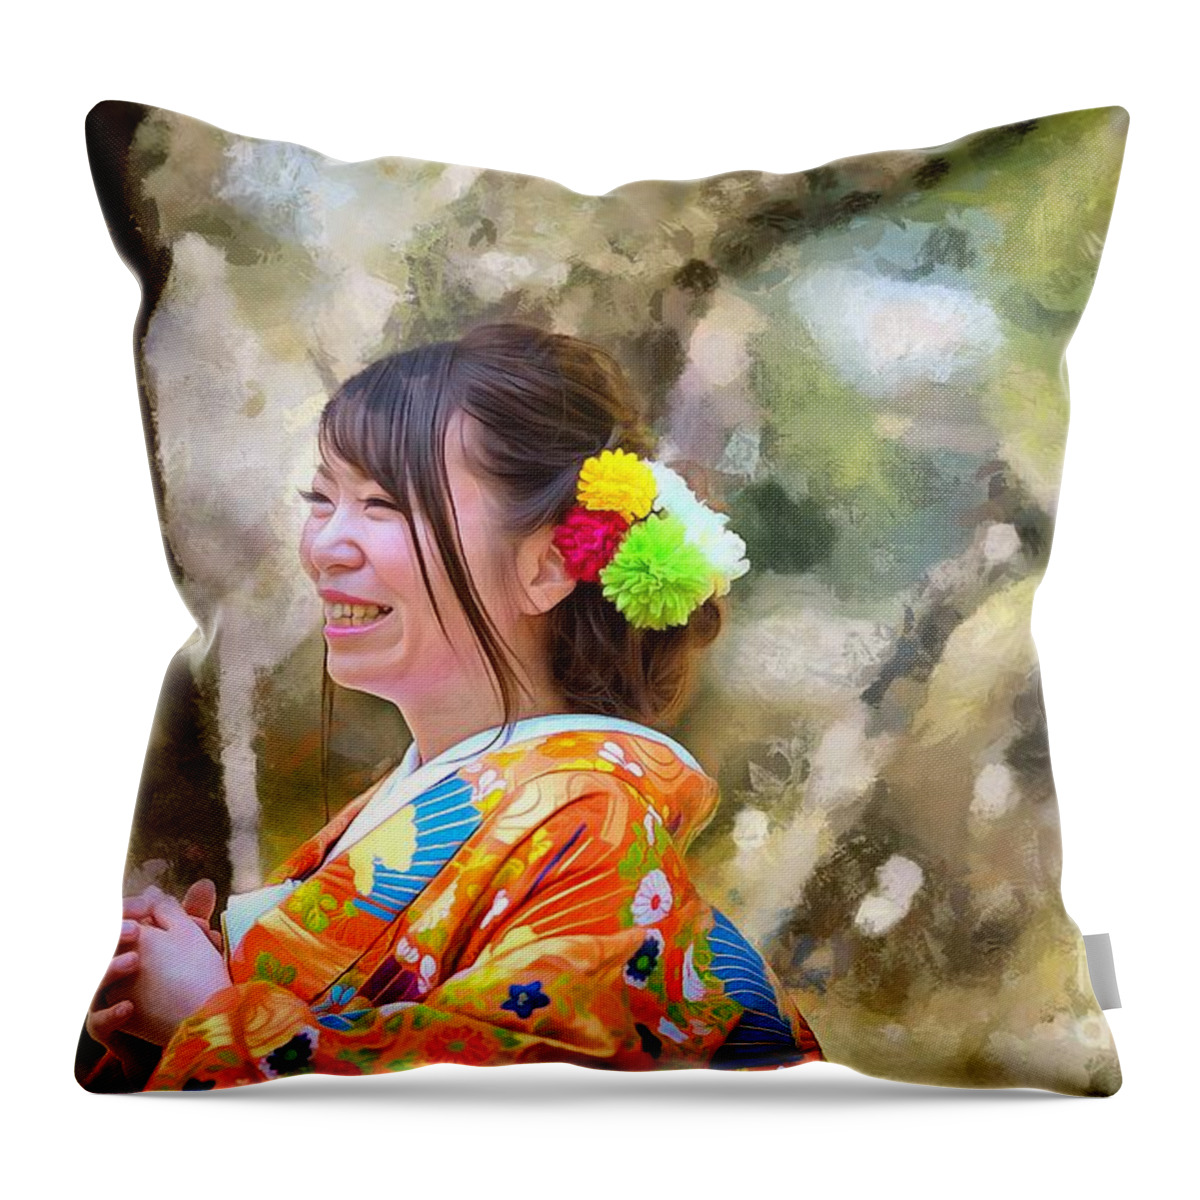 Young Woman Throw Pillow featuring the digital art Happy by Eva Lechner